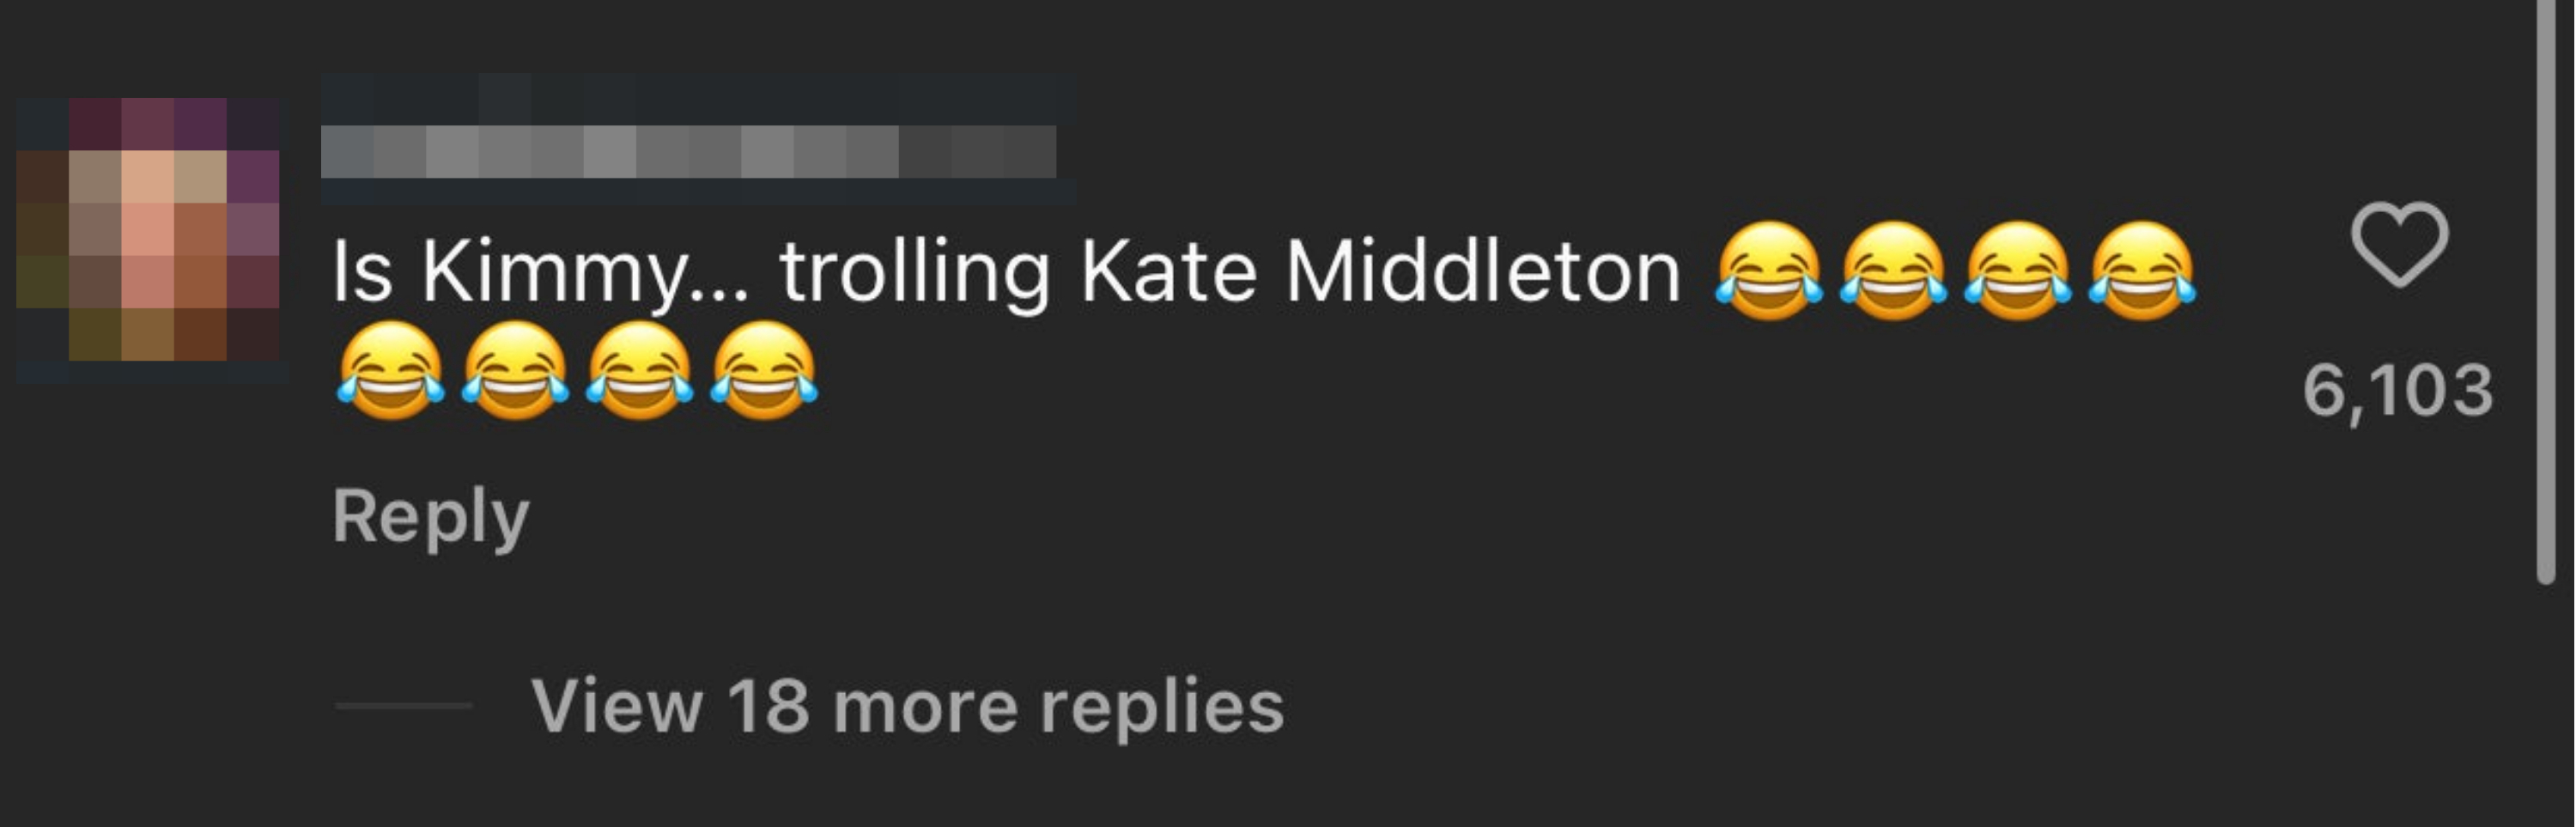 Social media comment questioning if Kim Kardashian is trolling Kate Middleton, shown with laughing emojis